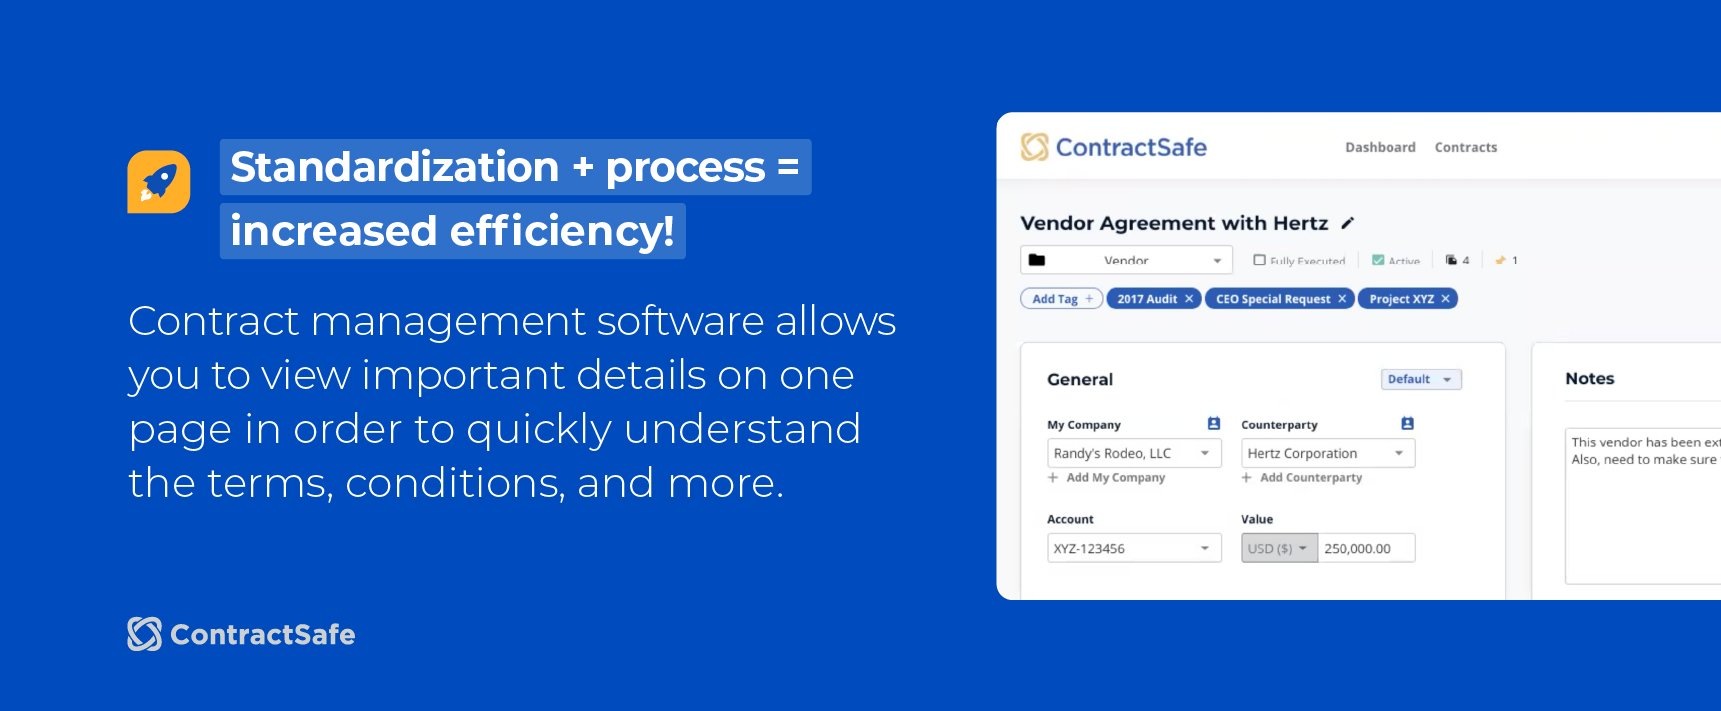 ContractSafe-Blog-6-Best-Practices-for-Effective-Contract-Management-IMAGES-2